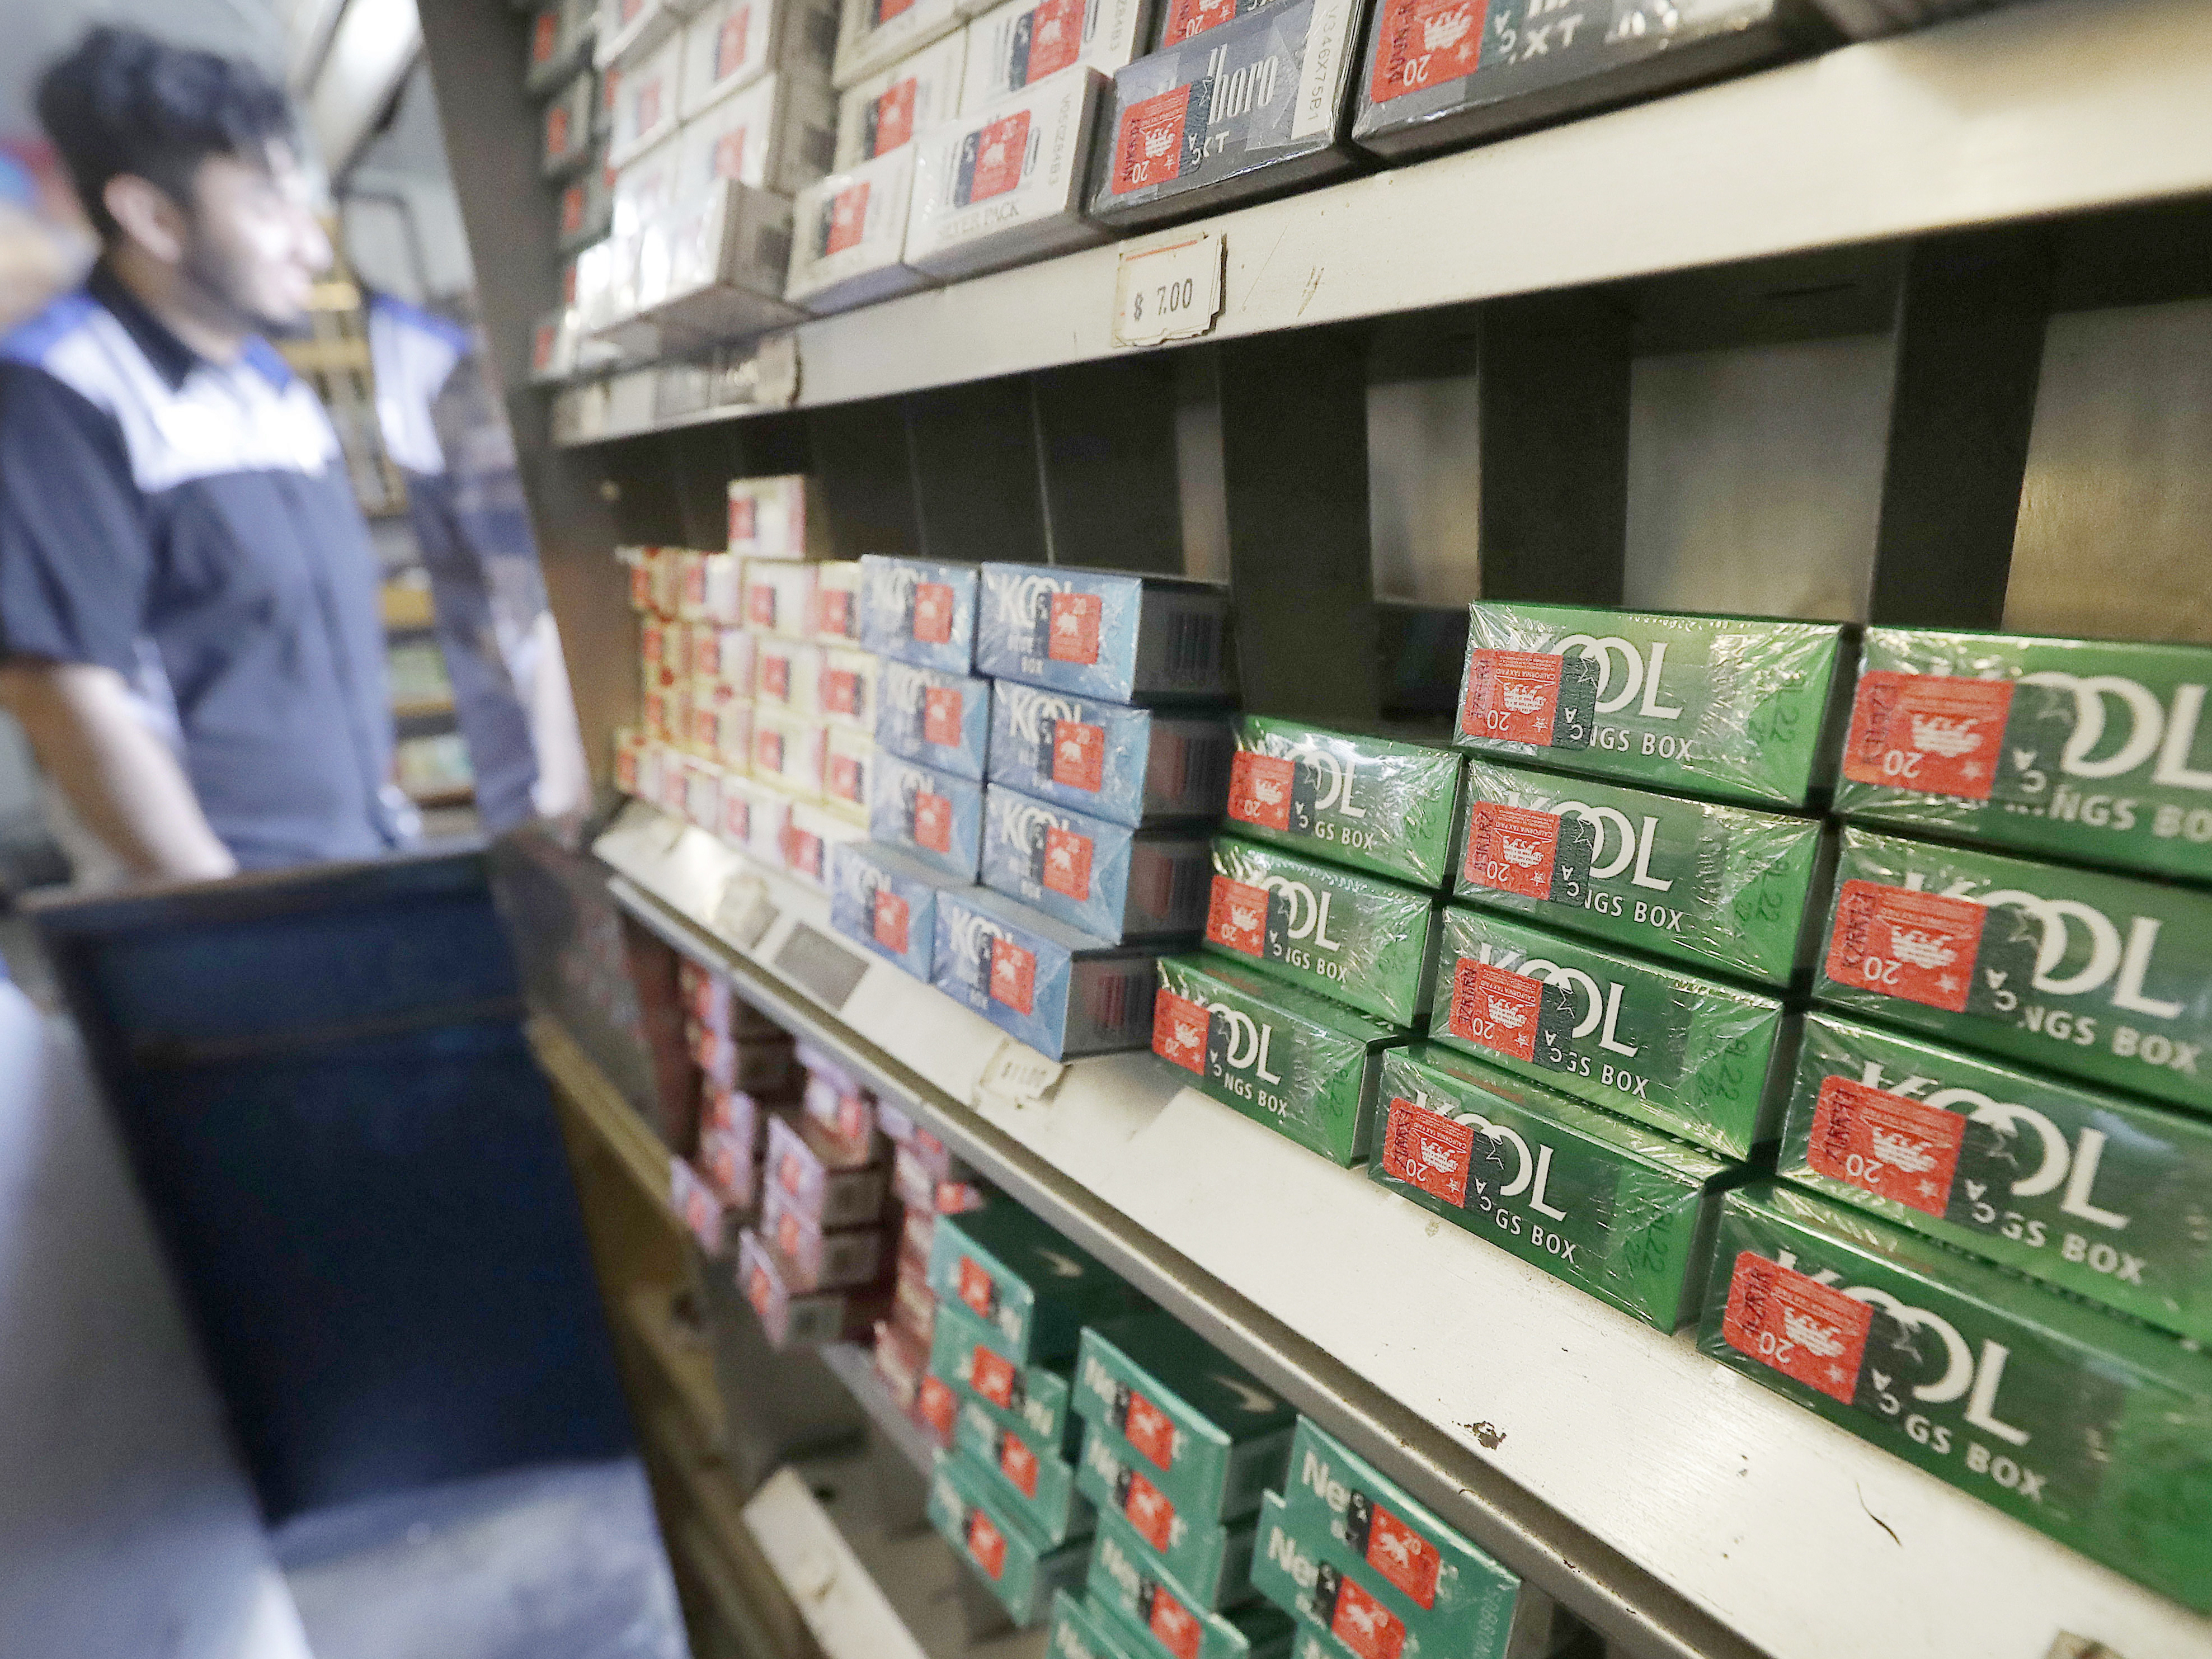 FILE - This May 17, 2018 file photo shows packs of menthol cigarettes and other tobacco products at a store in San Francisco. U.S. health regulators will announce a new effort Thursday, April 29, 2021, to ban menthol cigarettes, according to an Biden administration official.